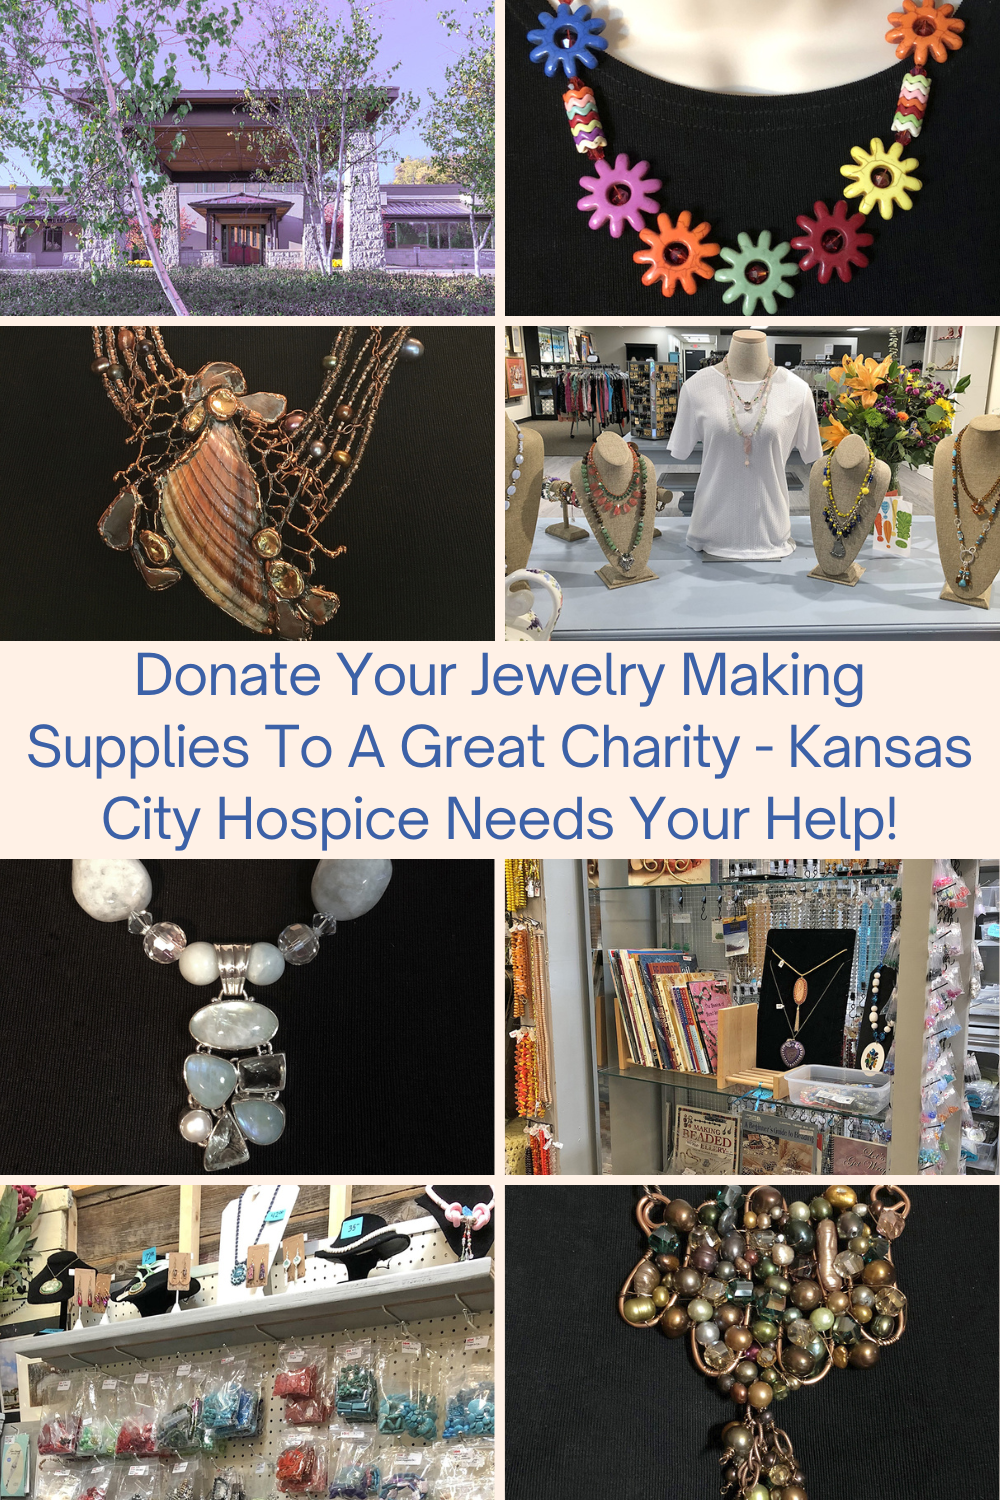 Donate Your Jewelry Making Supplies To A Great Charity - Kansas City Hospice Needs Your Help! Collage